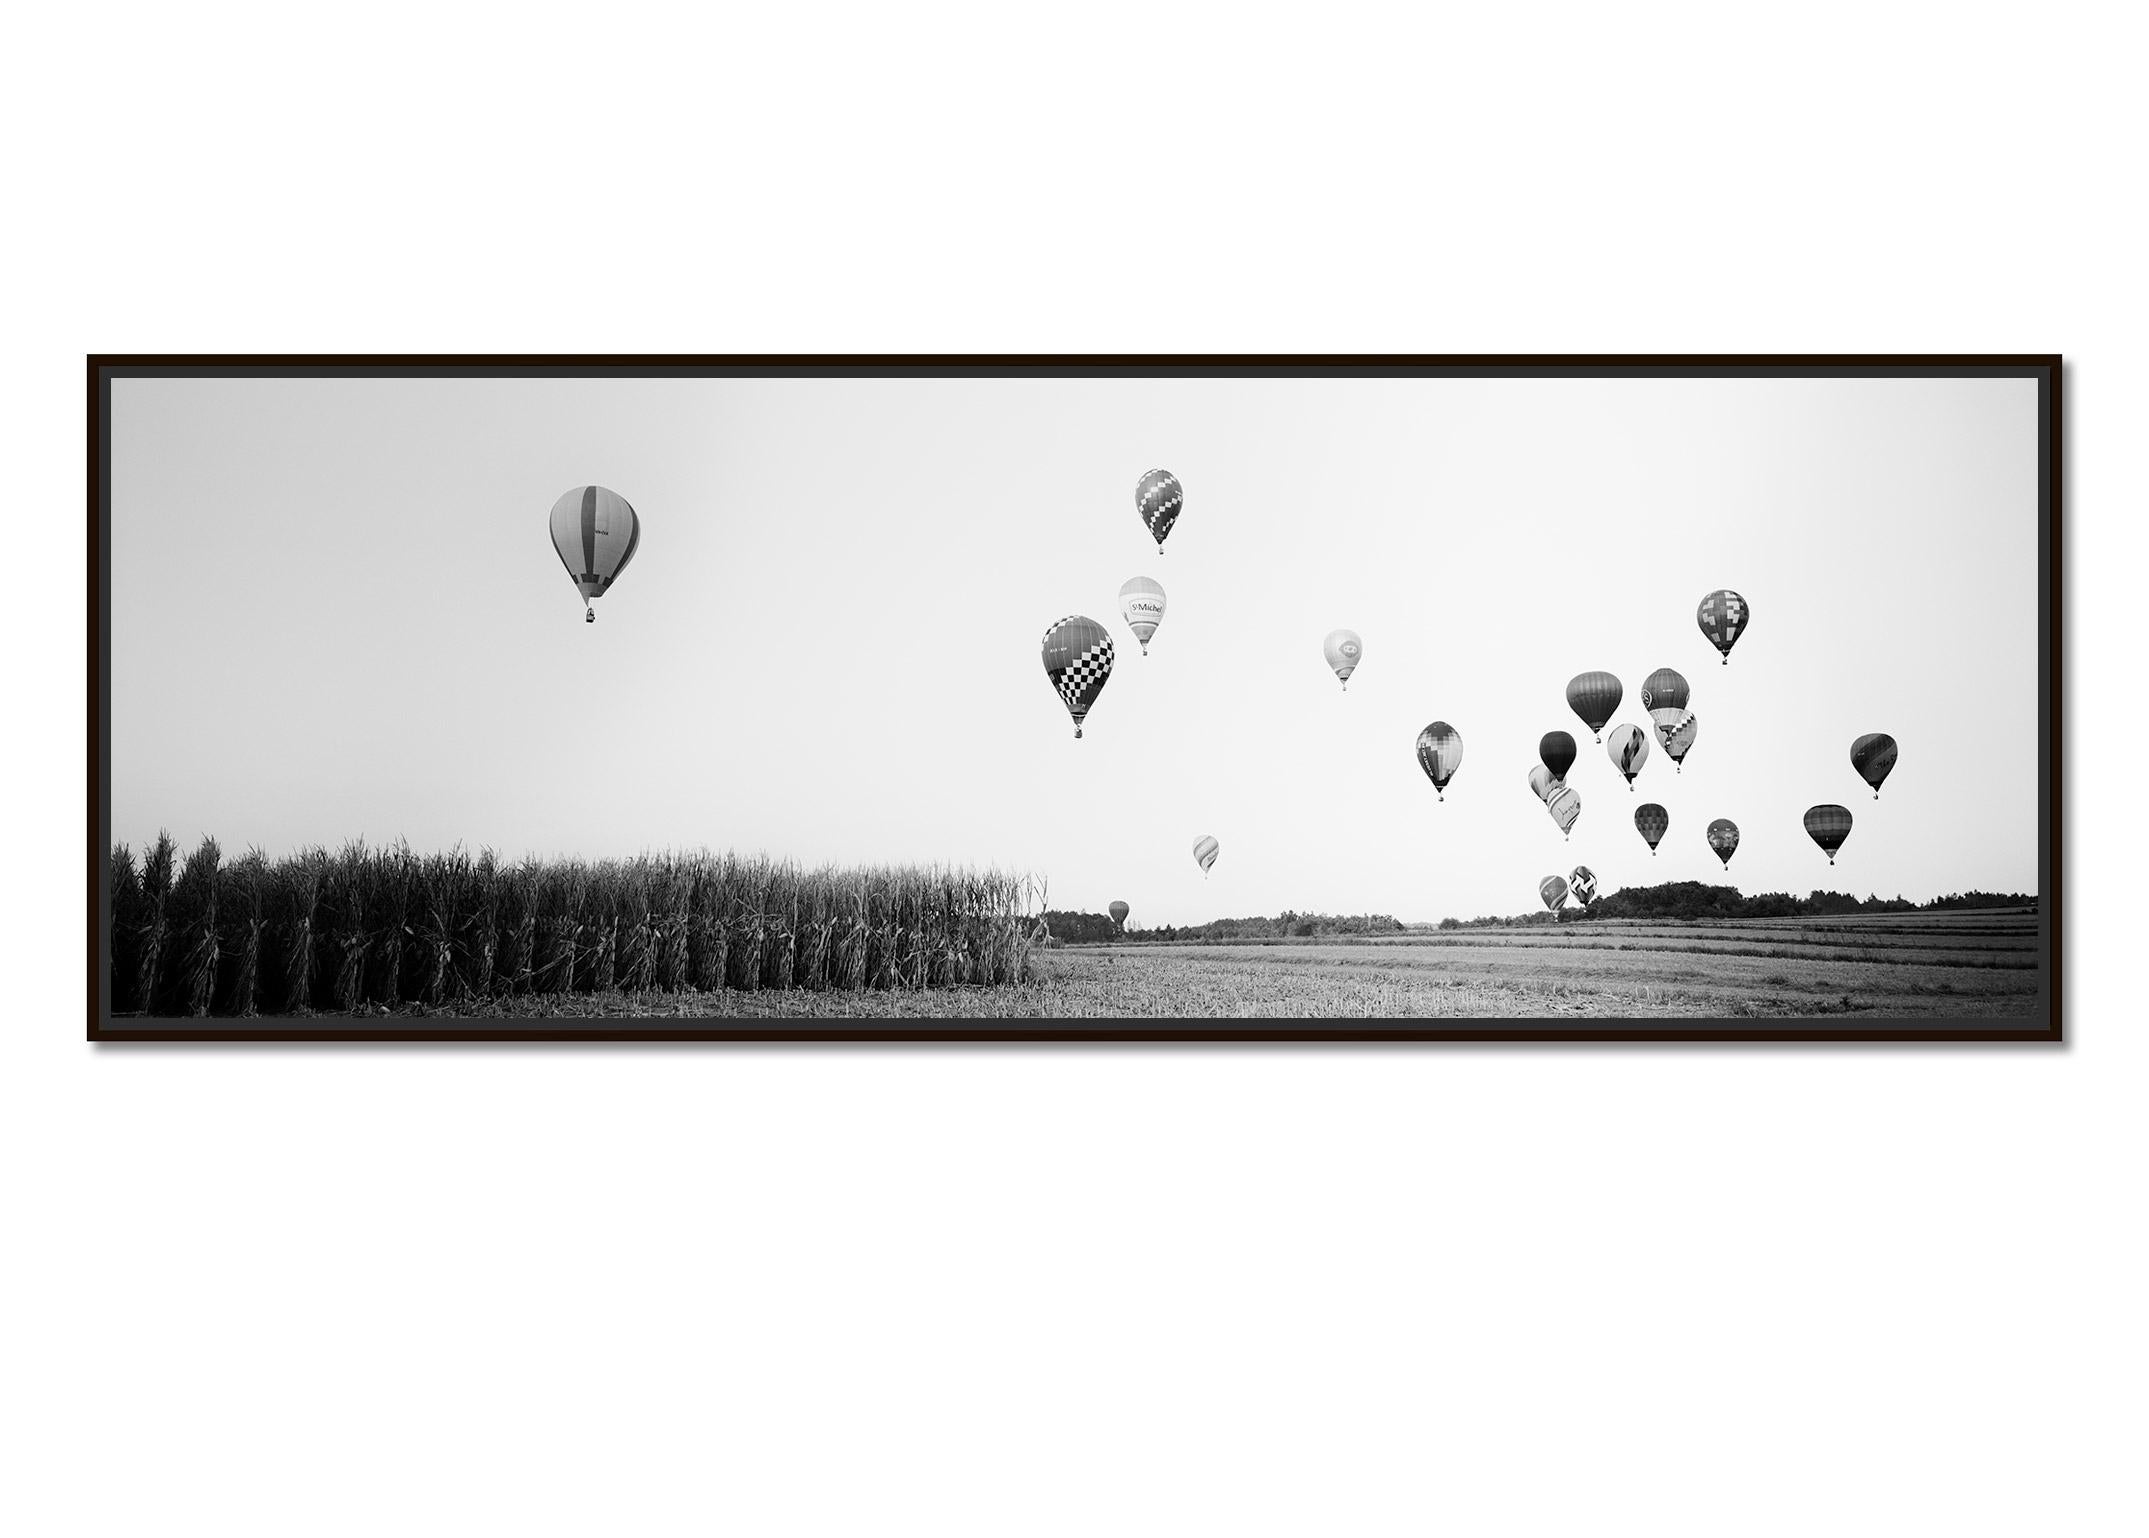 Hot Air Balloon Panorama, Championship, black and white photography, landscape - Photograph by Gerald Berghammer